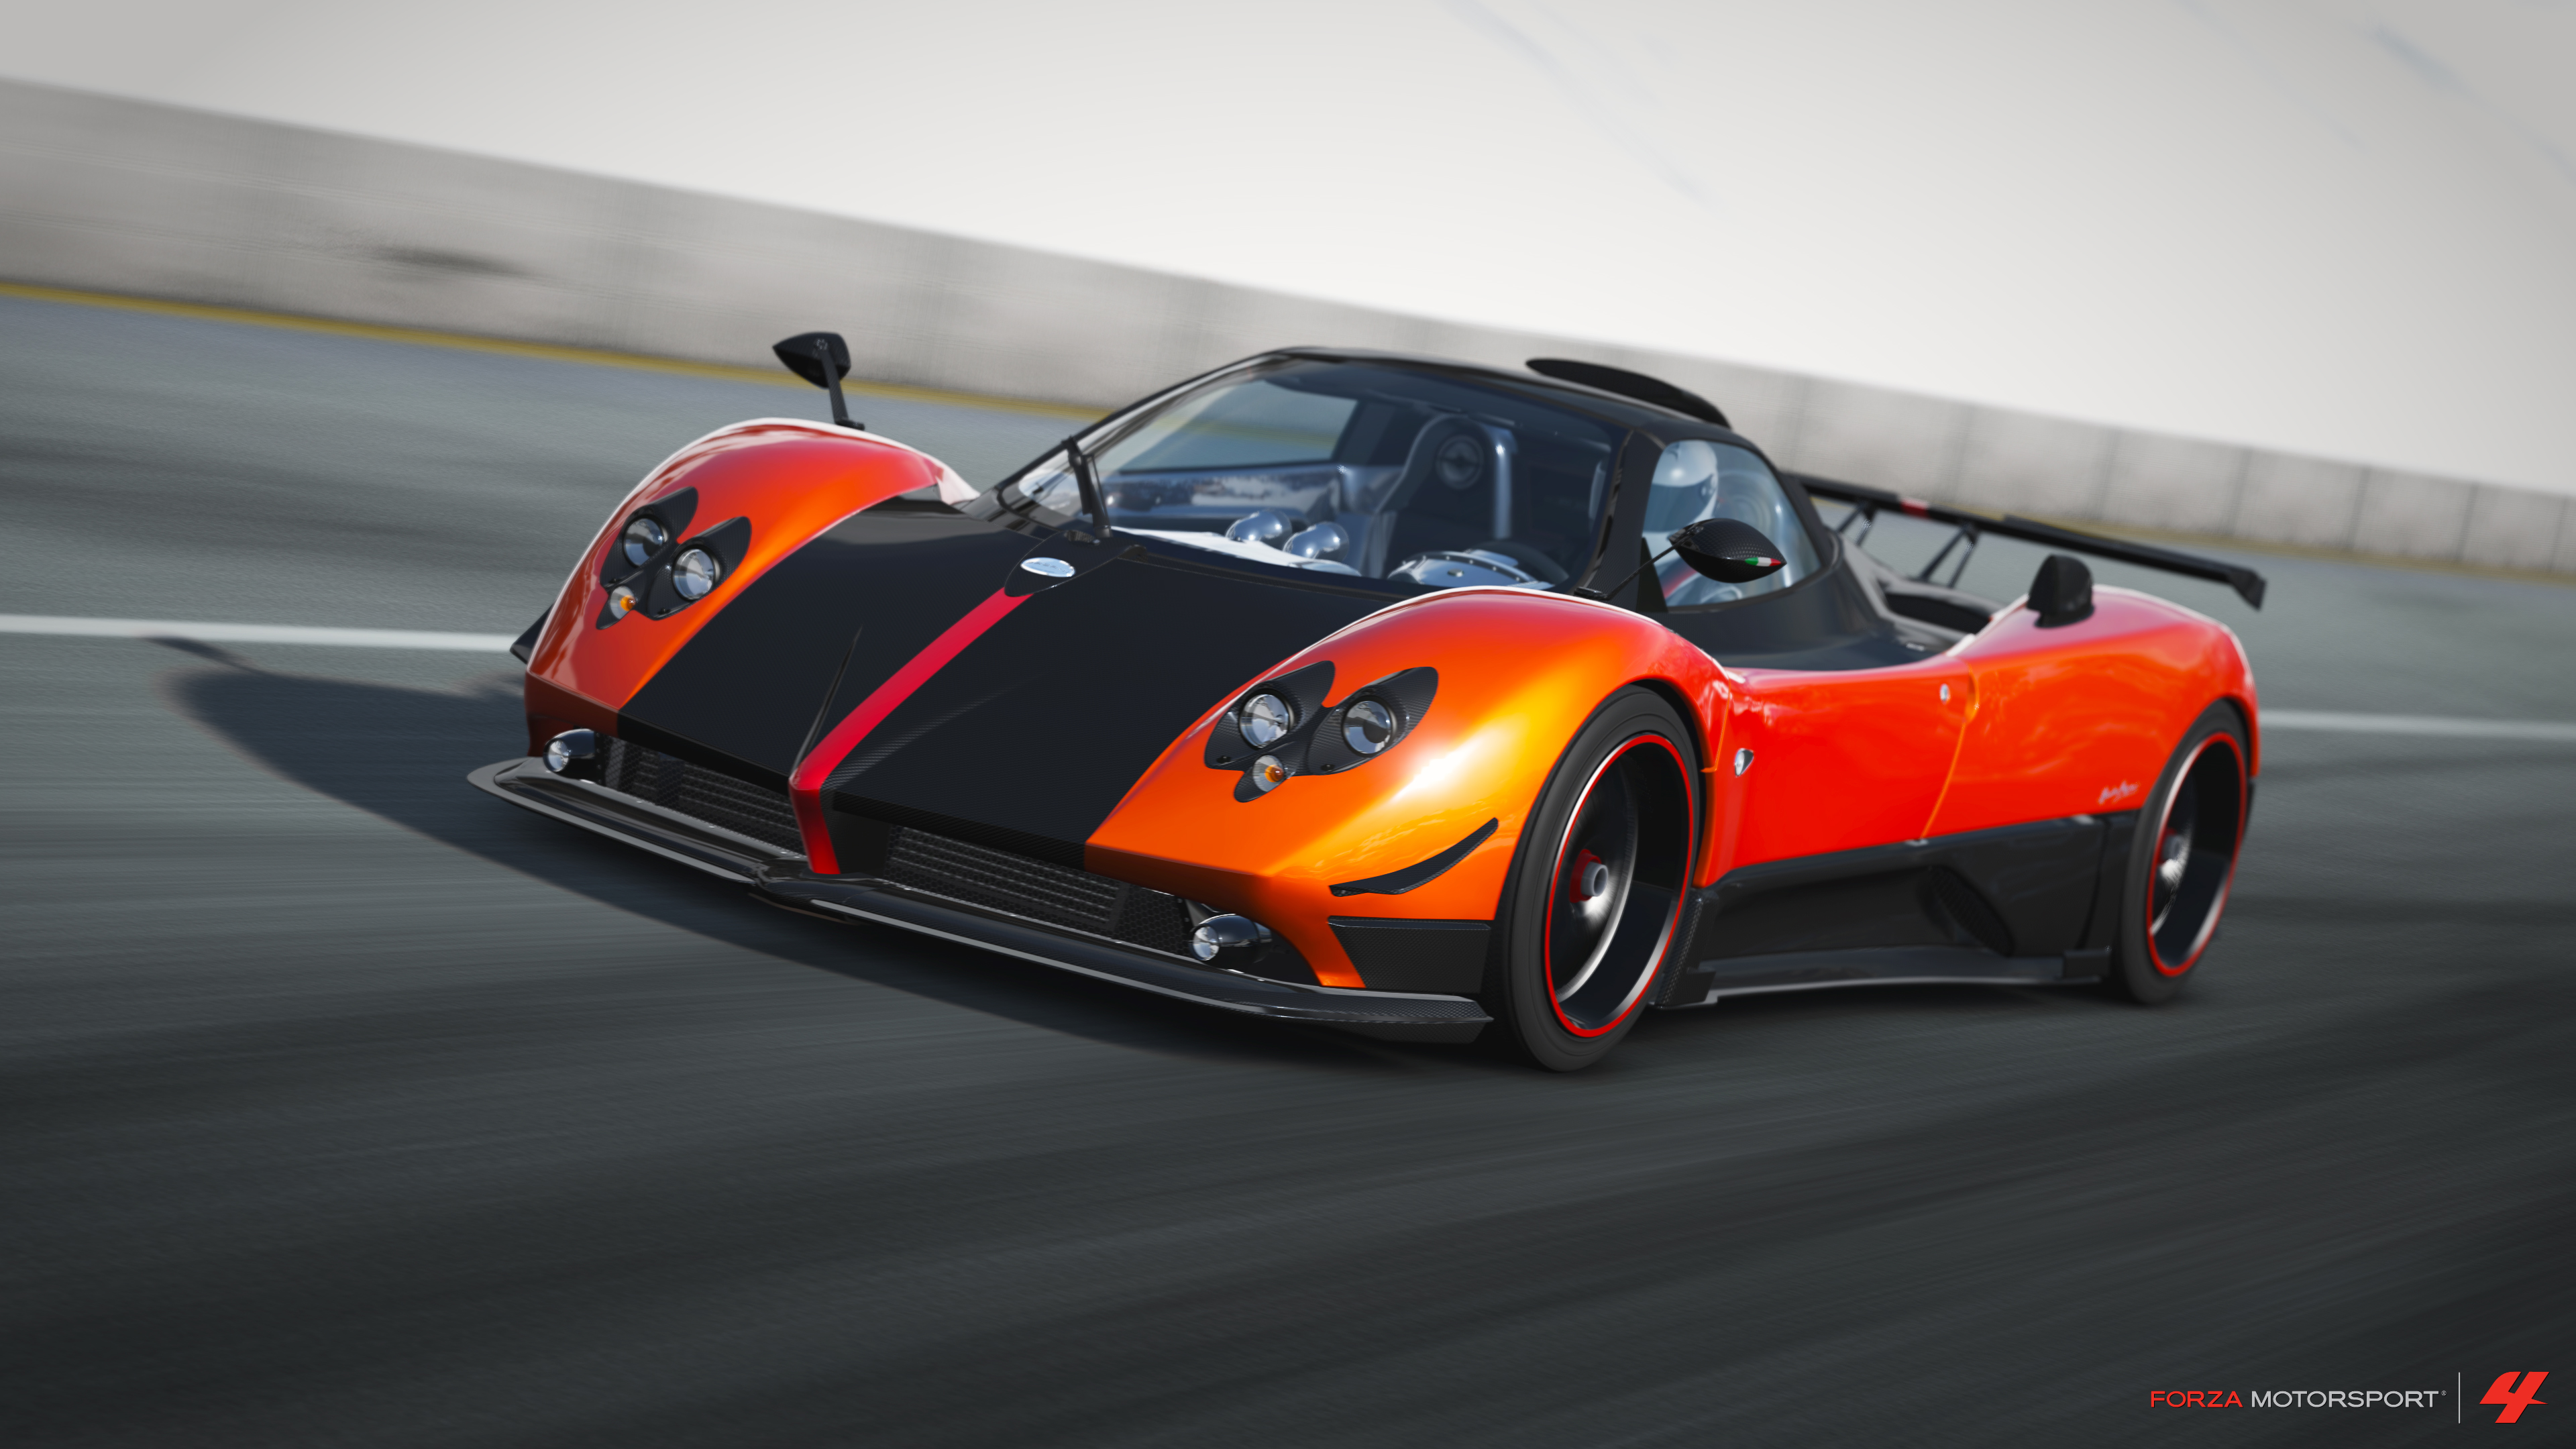 Pagani Car Hd Wallpapers For Mobile